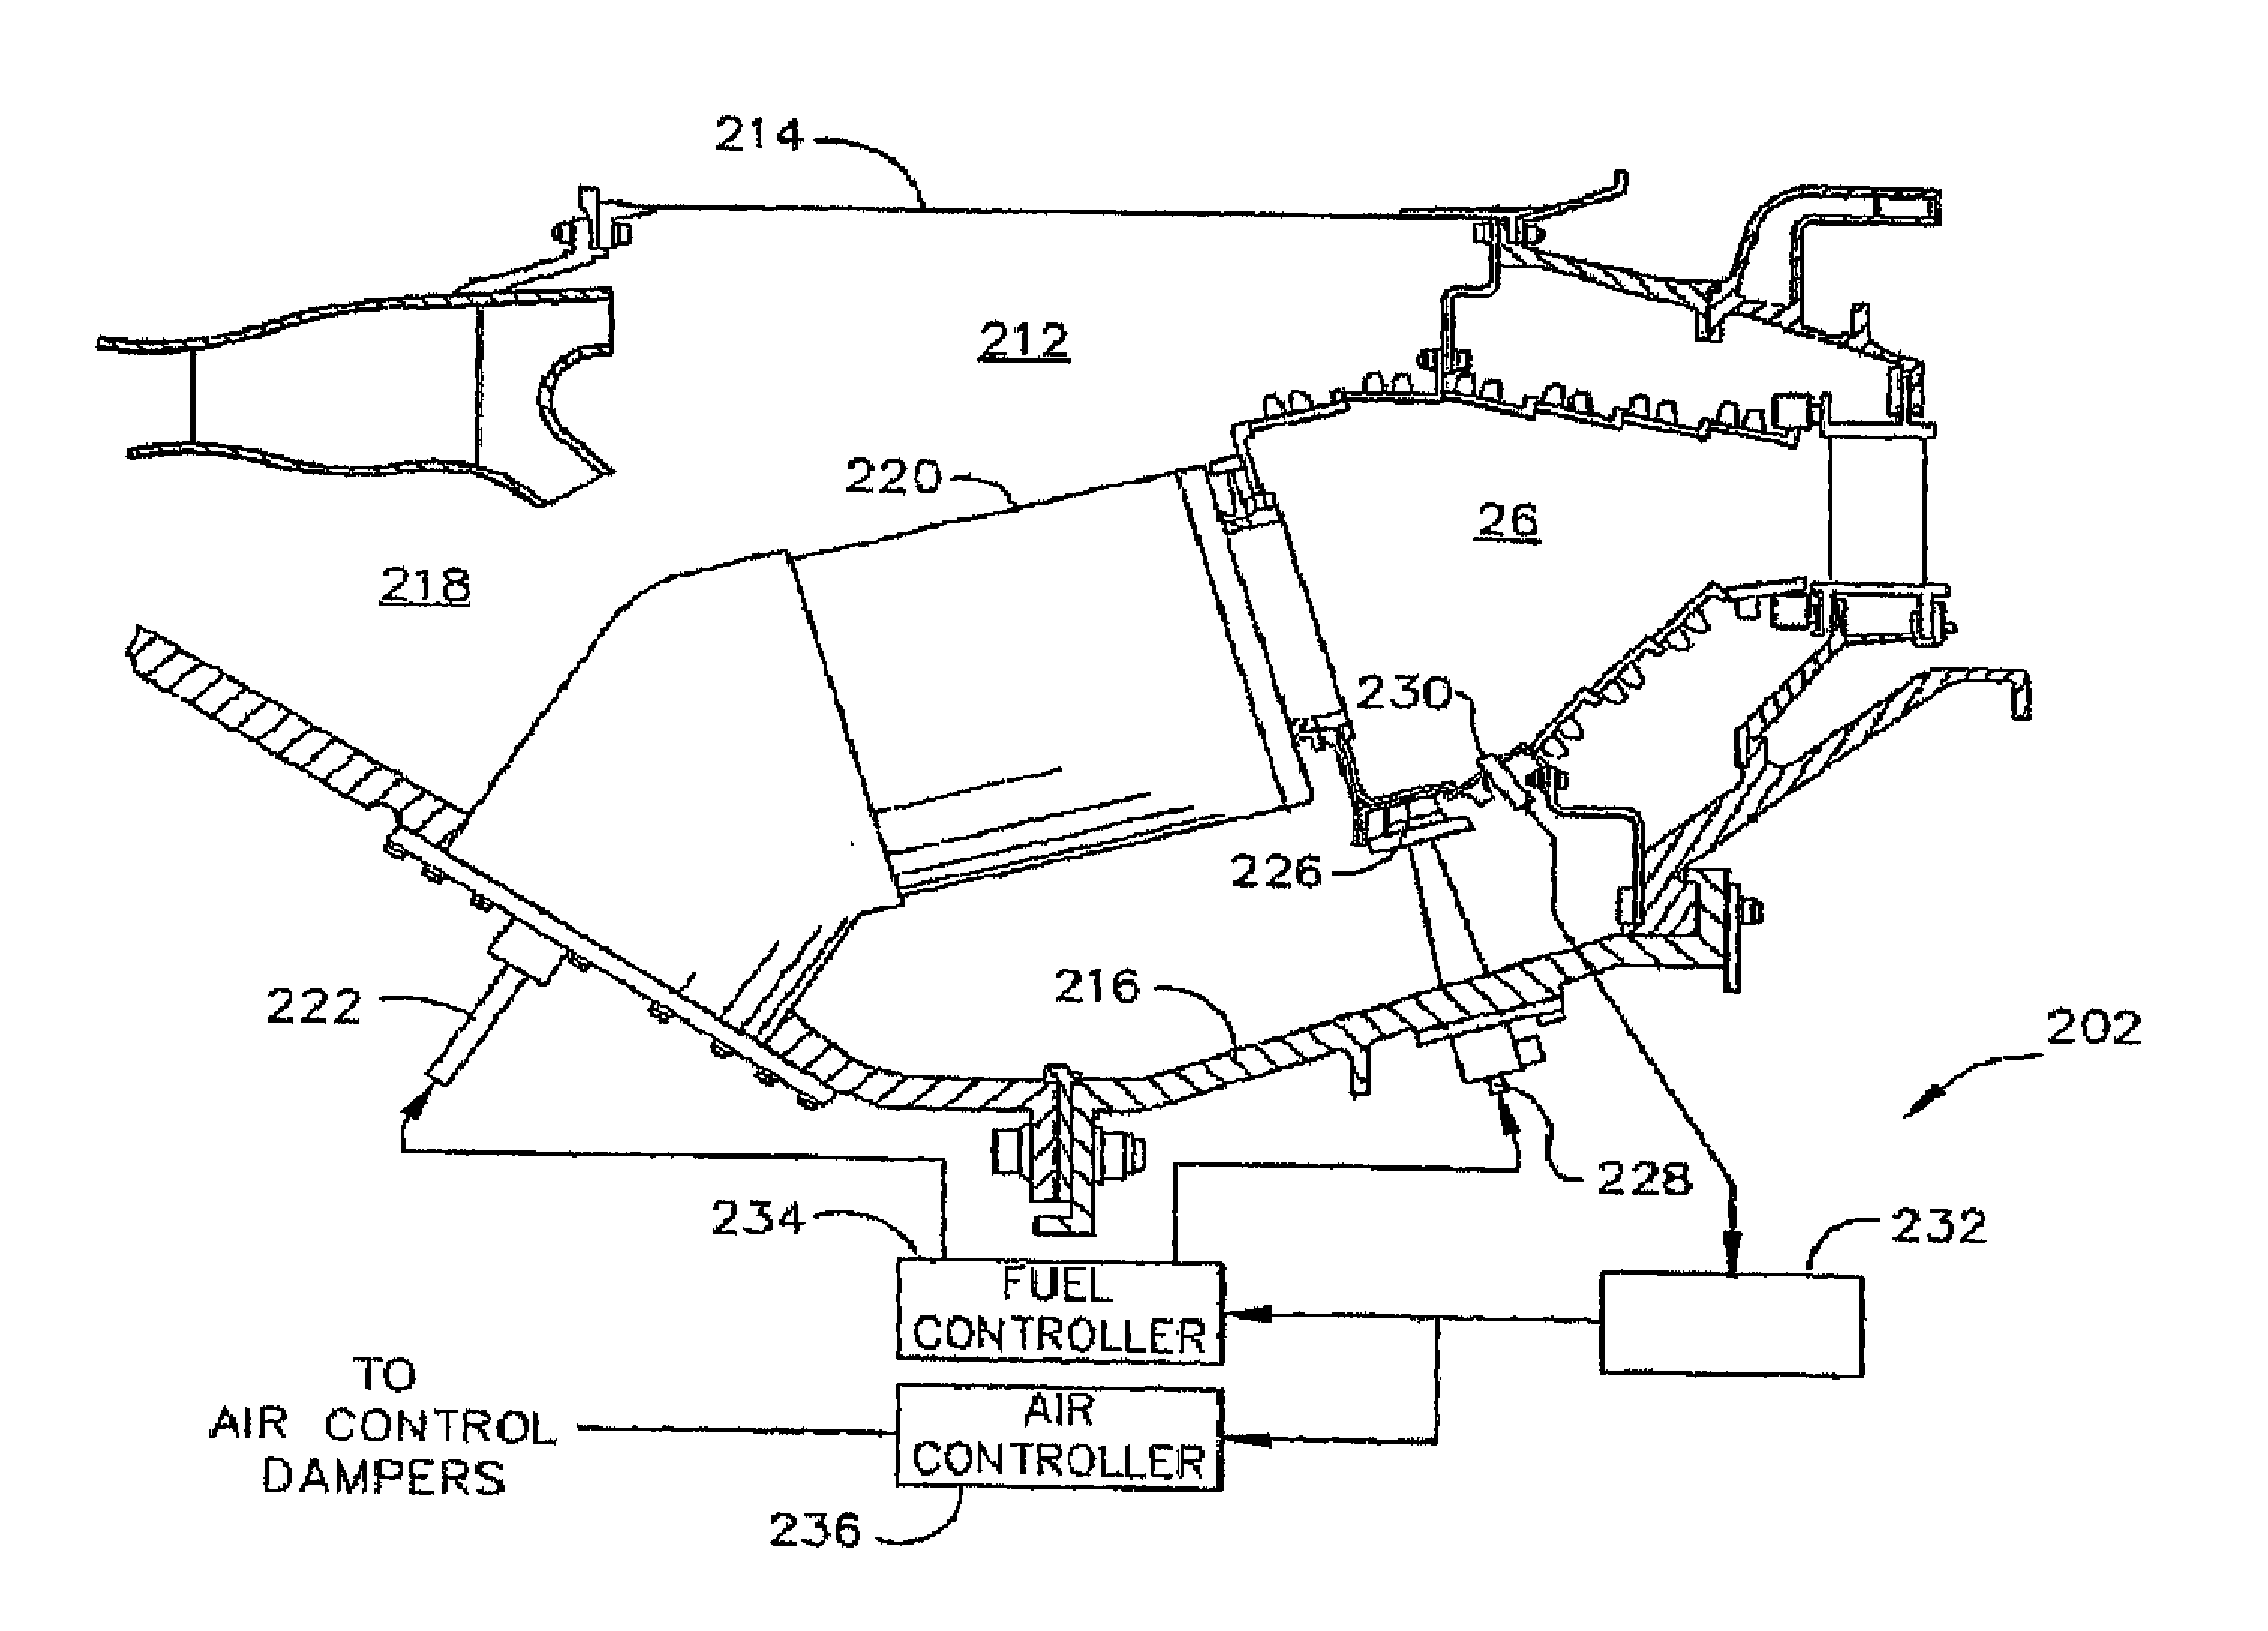 Resonator assembly for mitigating dynamics in gas turbines